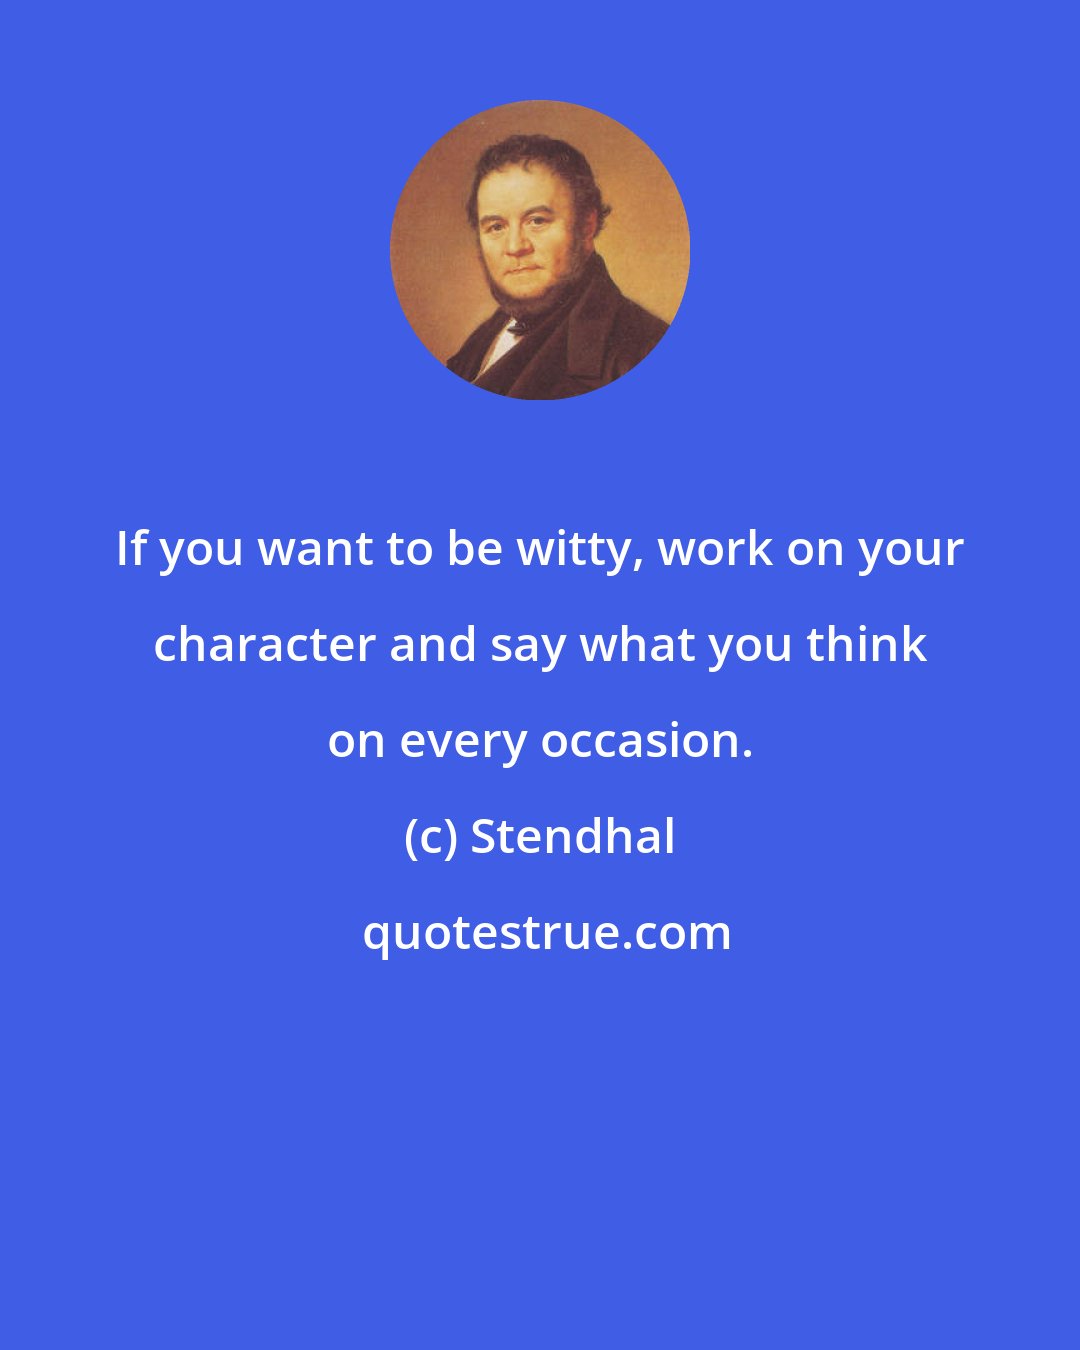 Stendhal: If you want to be witty, work on your character and say what you think on every occasion.